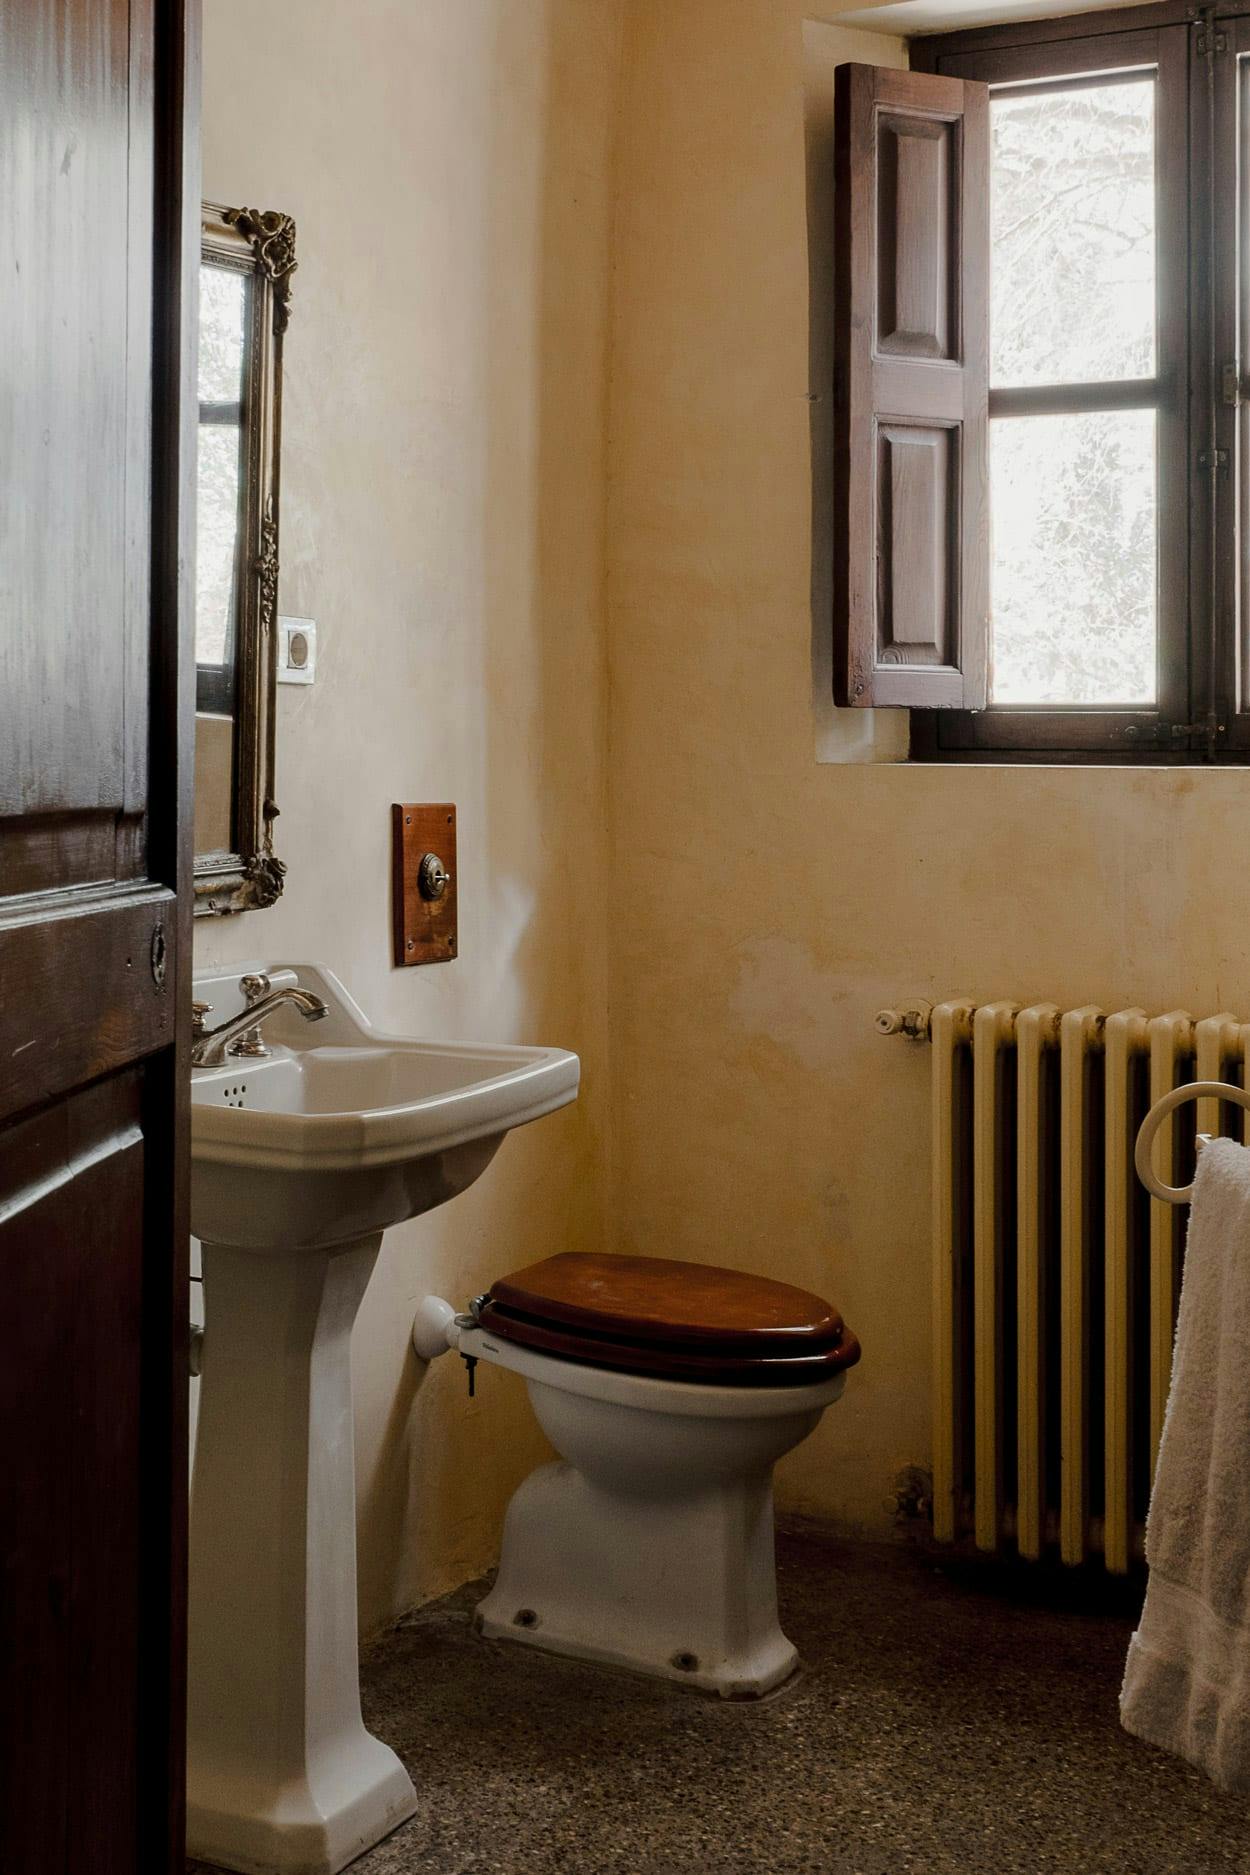 The image features a small, old-fashioned bathroom with a white toilet, sink, and radiator.